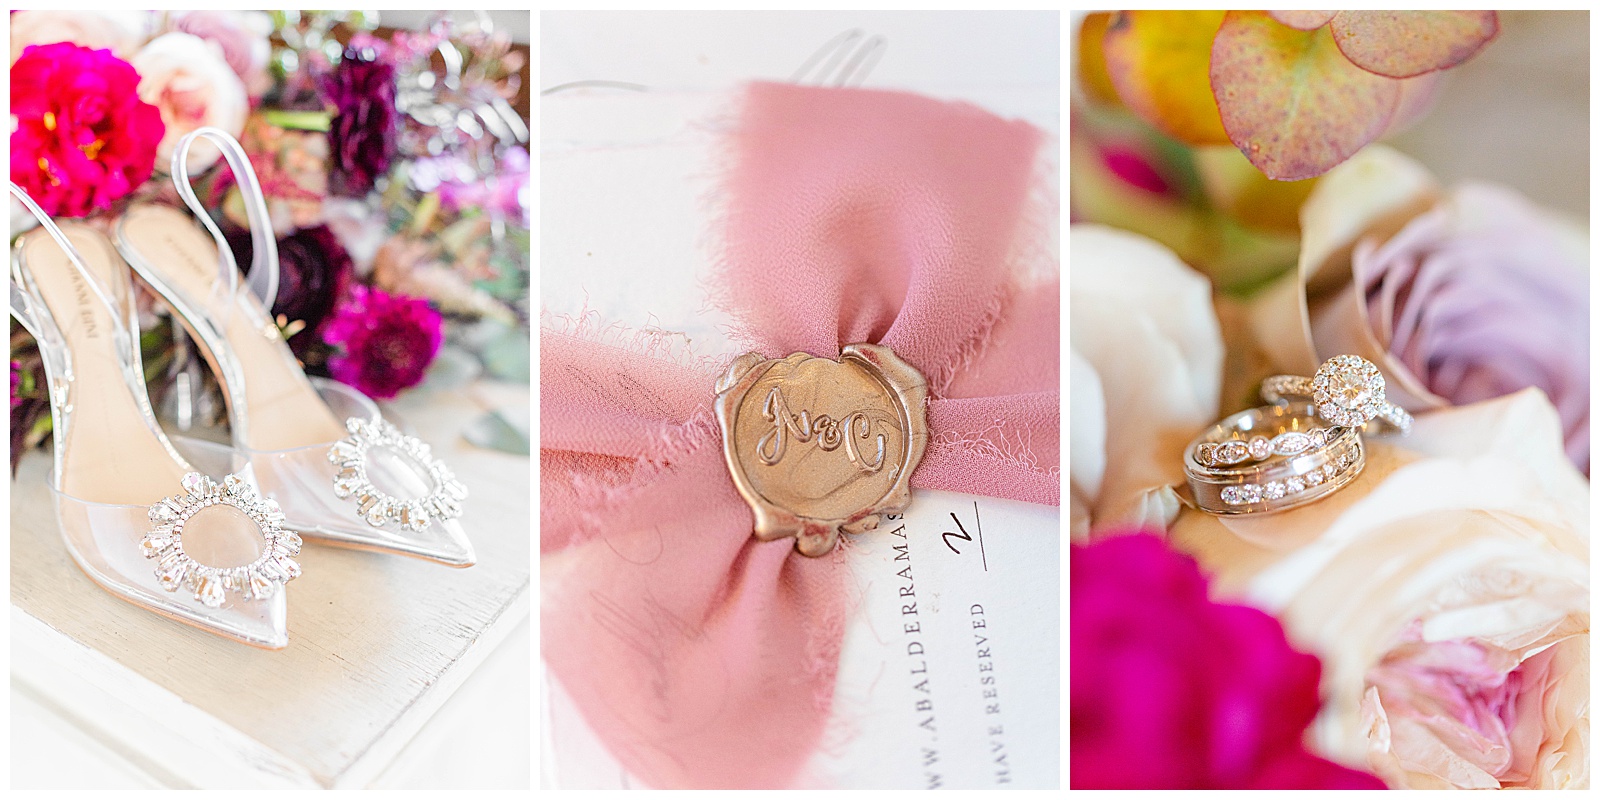 Wedding Details at Ma Maison by Indy Pop Photo